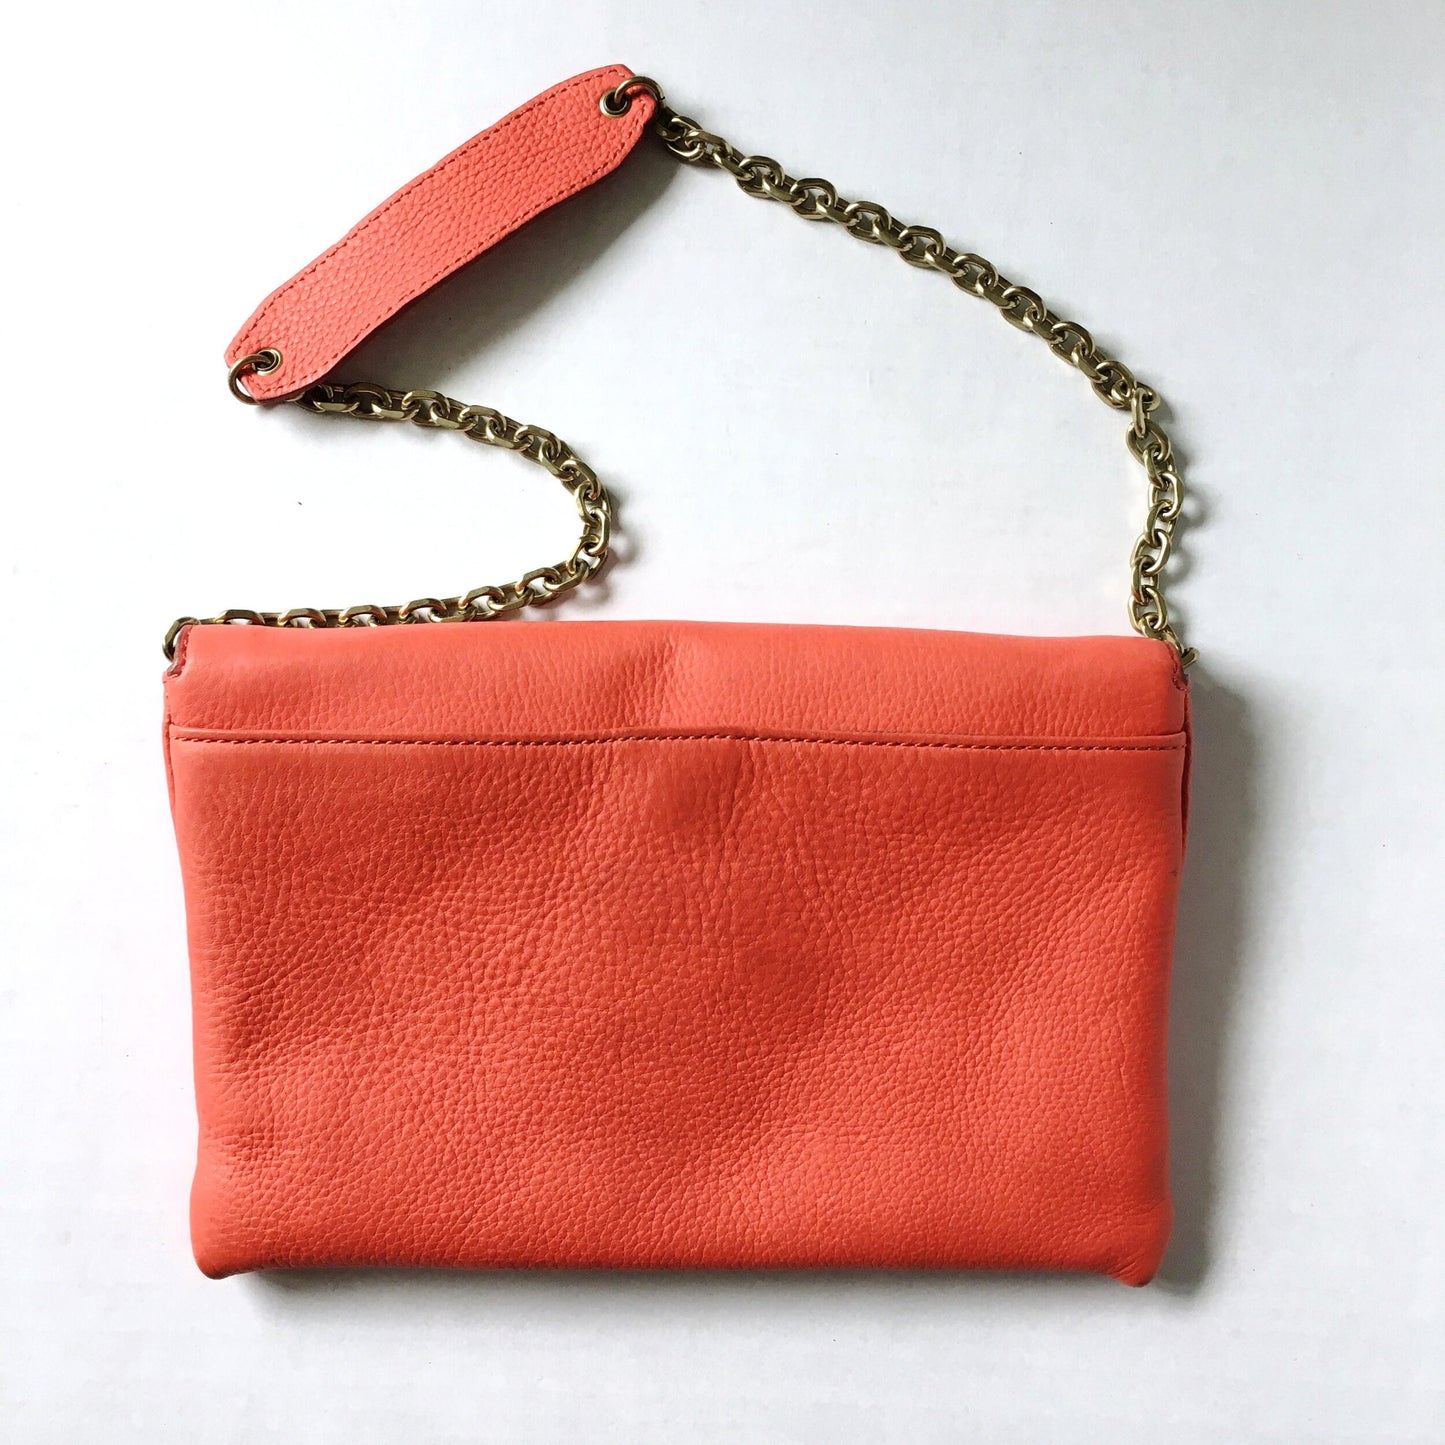 J Crew leather envelope clutch with chain